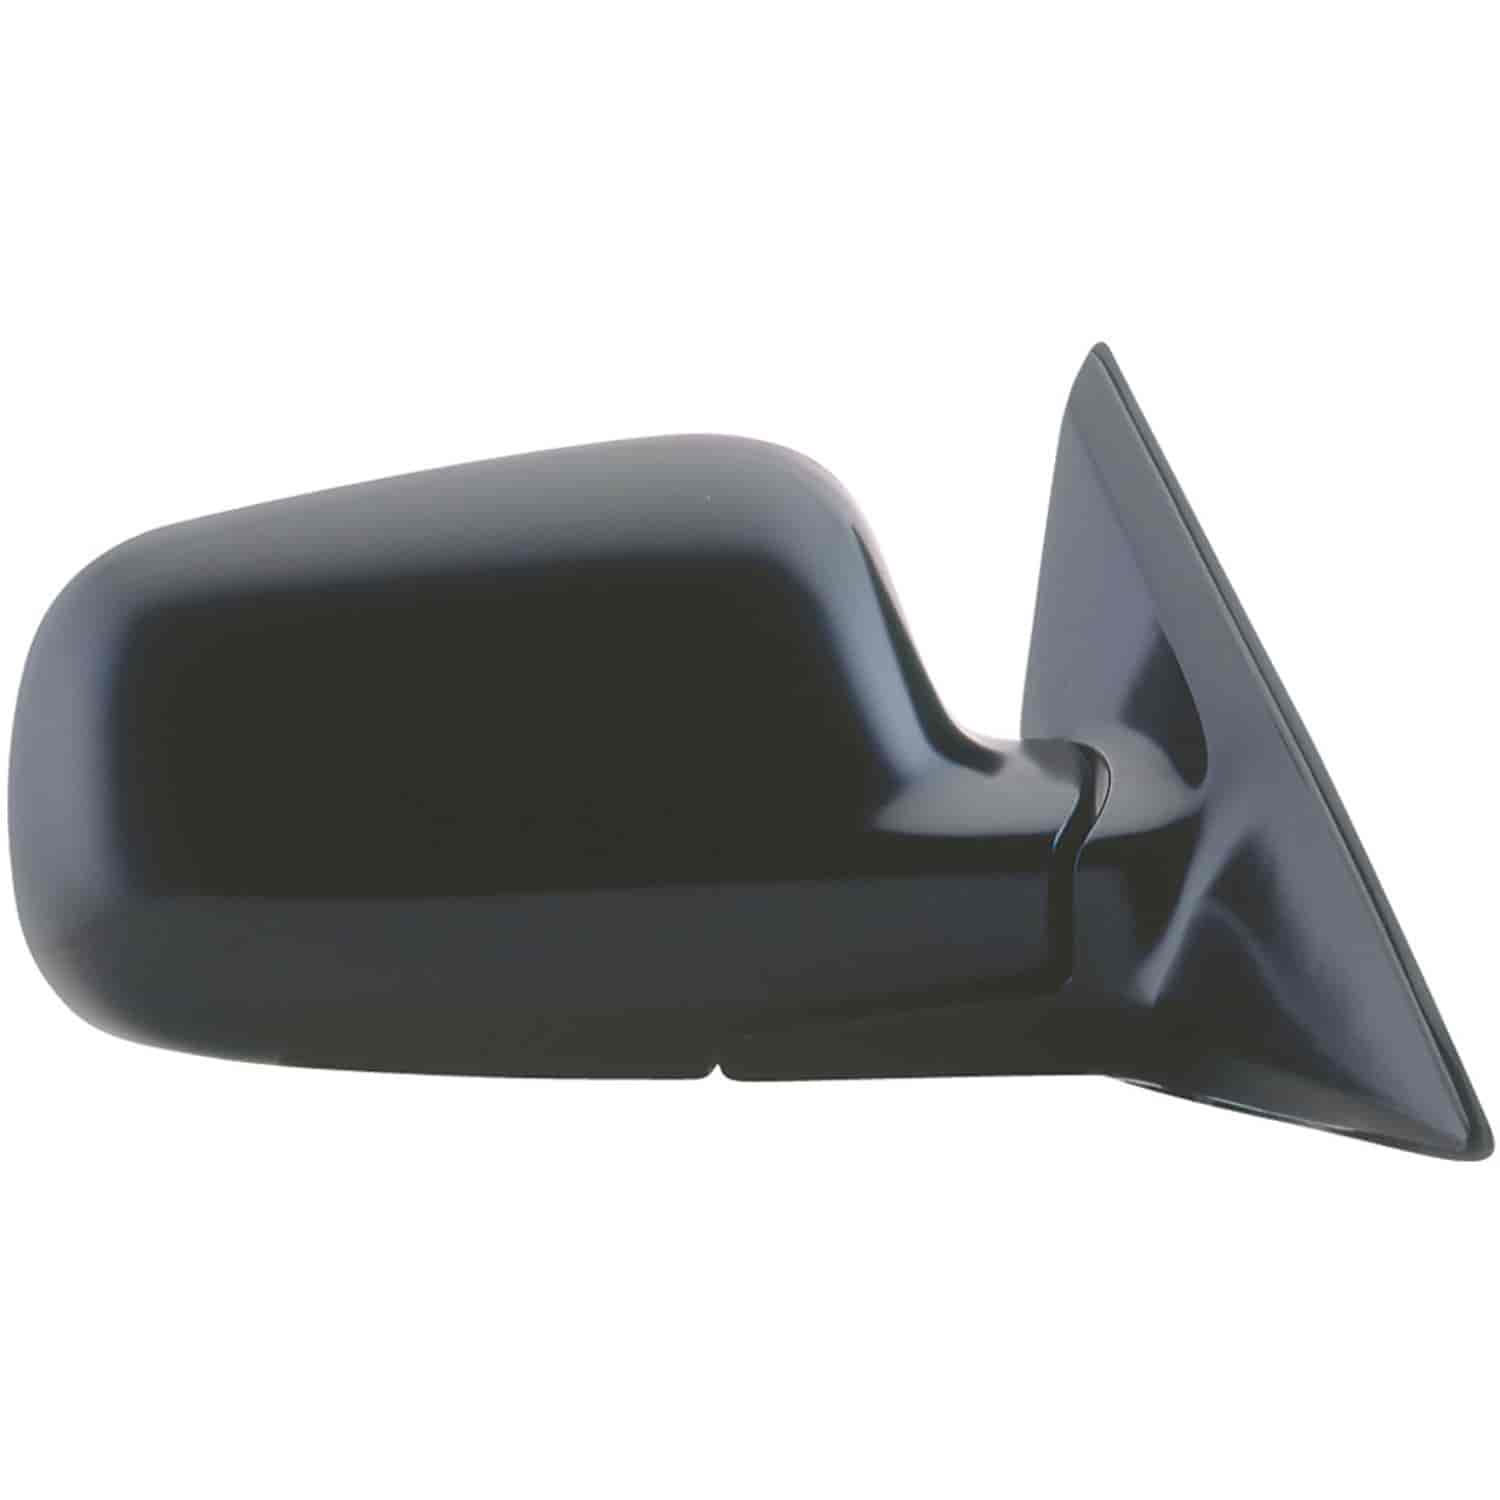 OEM Style Replacement mirror for 94-97 Honda Accord Coupe passenger side mirror tested to fit and fu